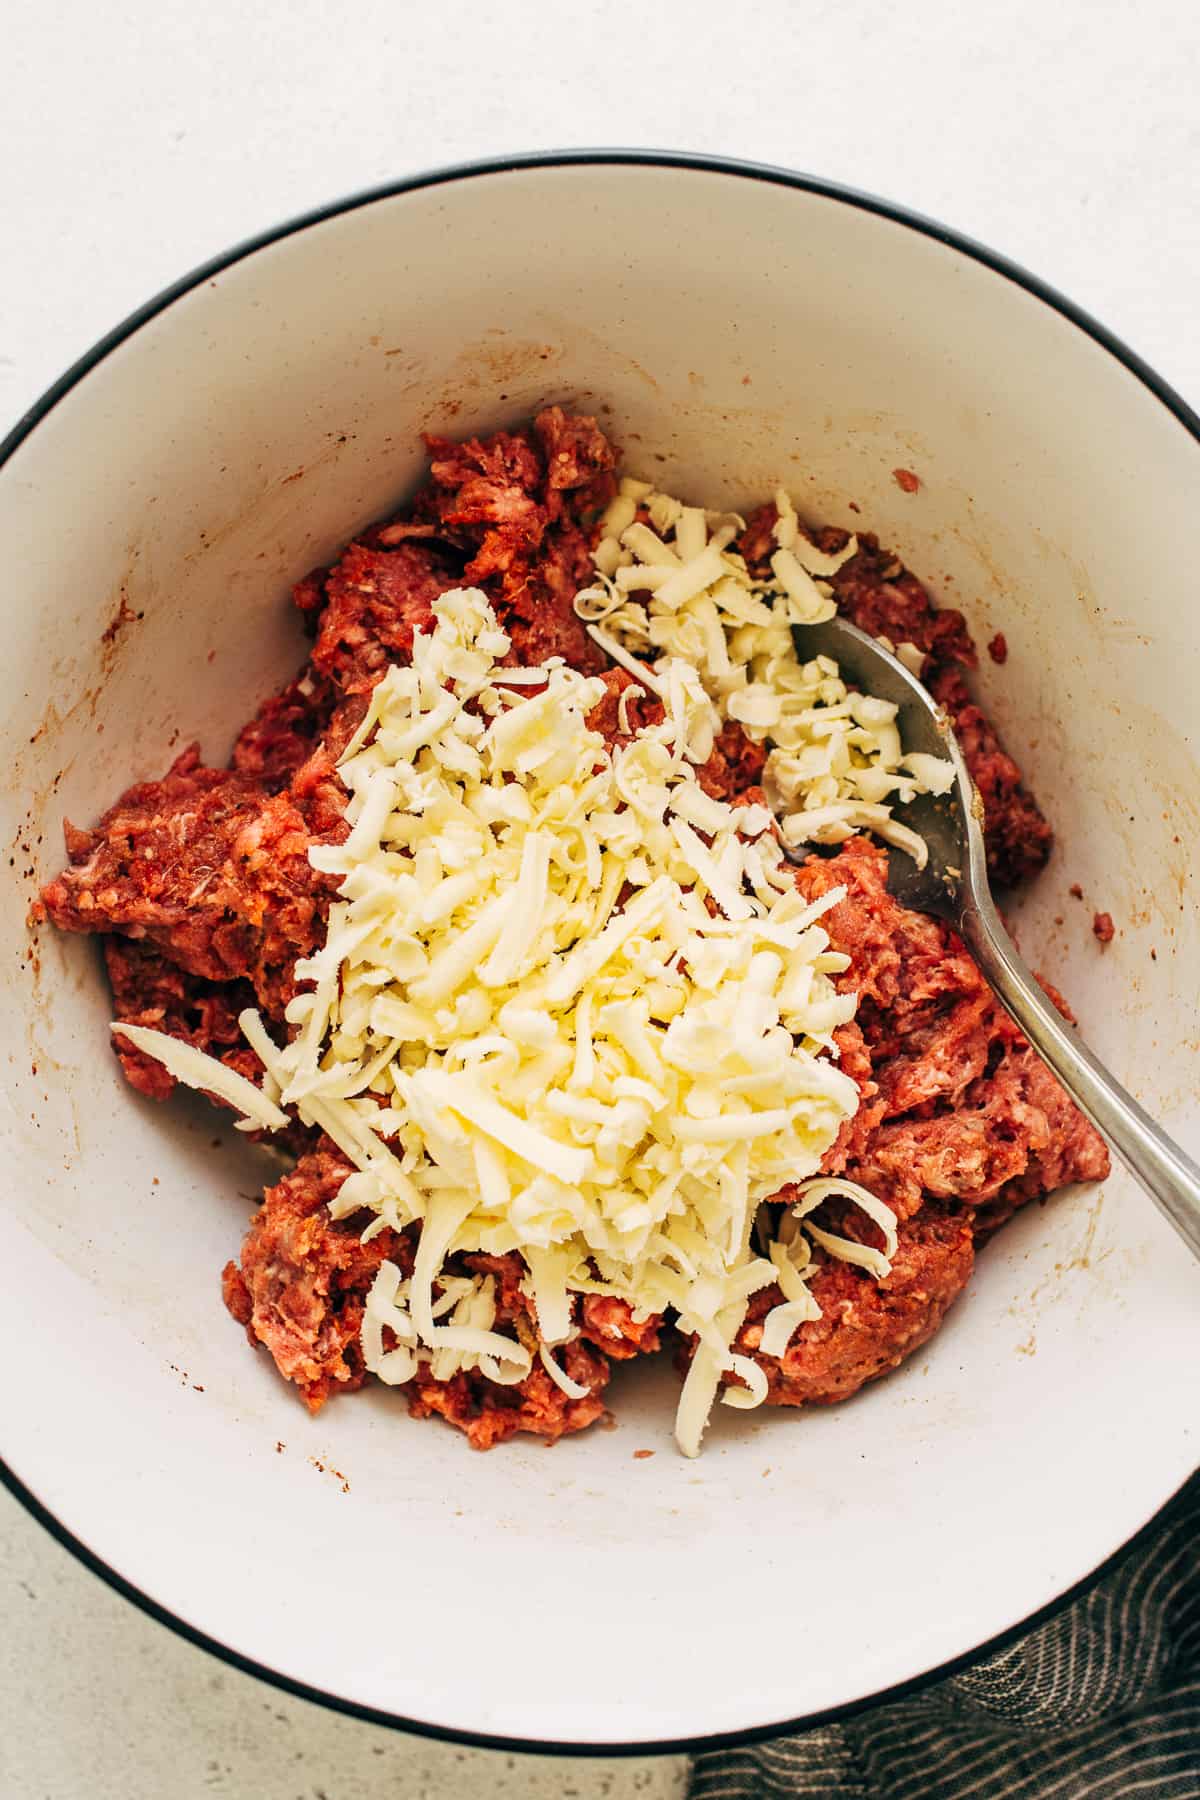 Homemade burger mixture topped with grated butter in a bowl.